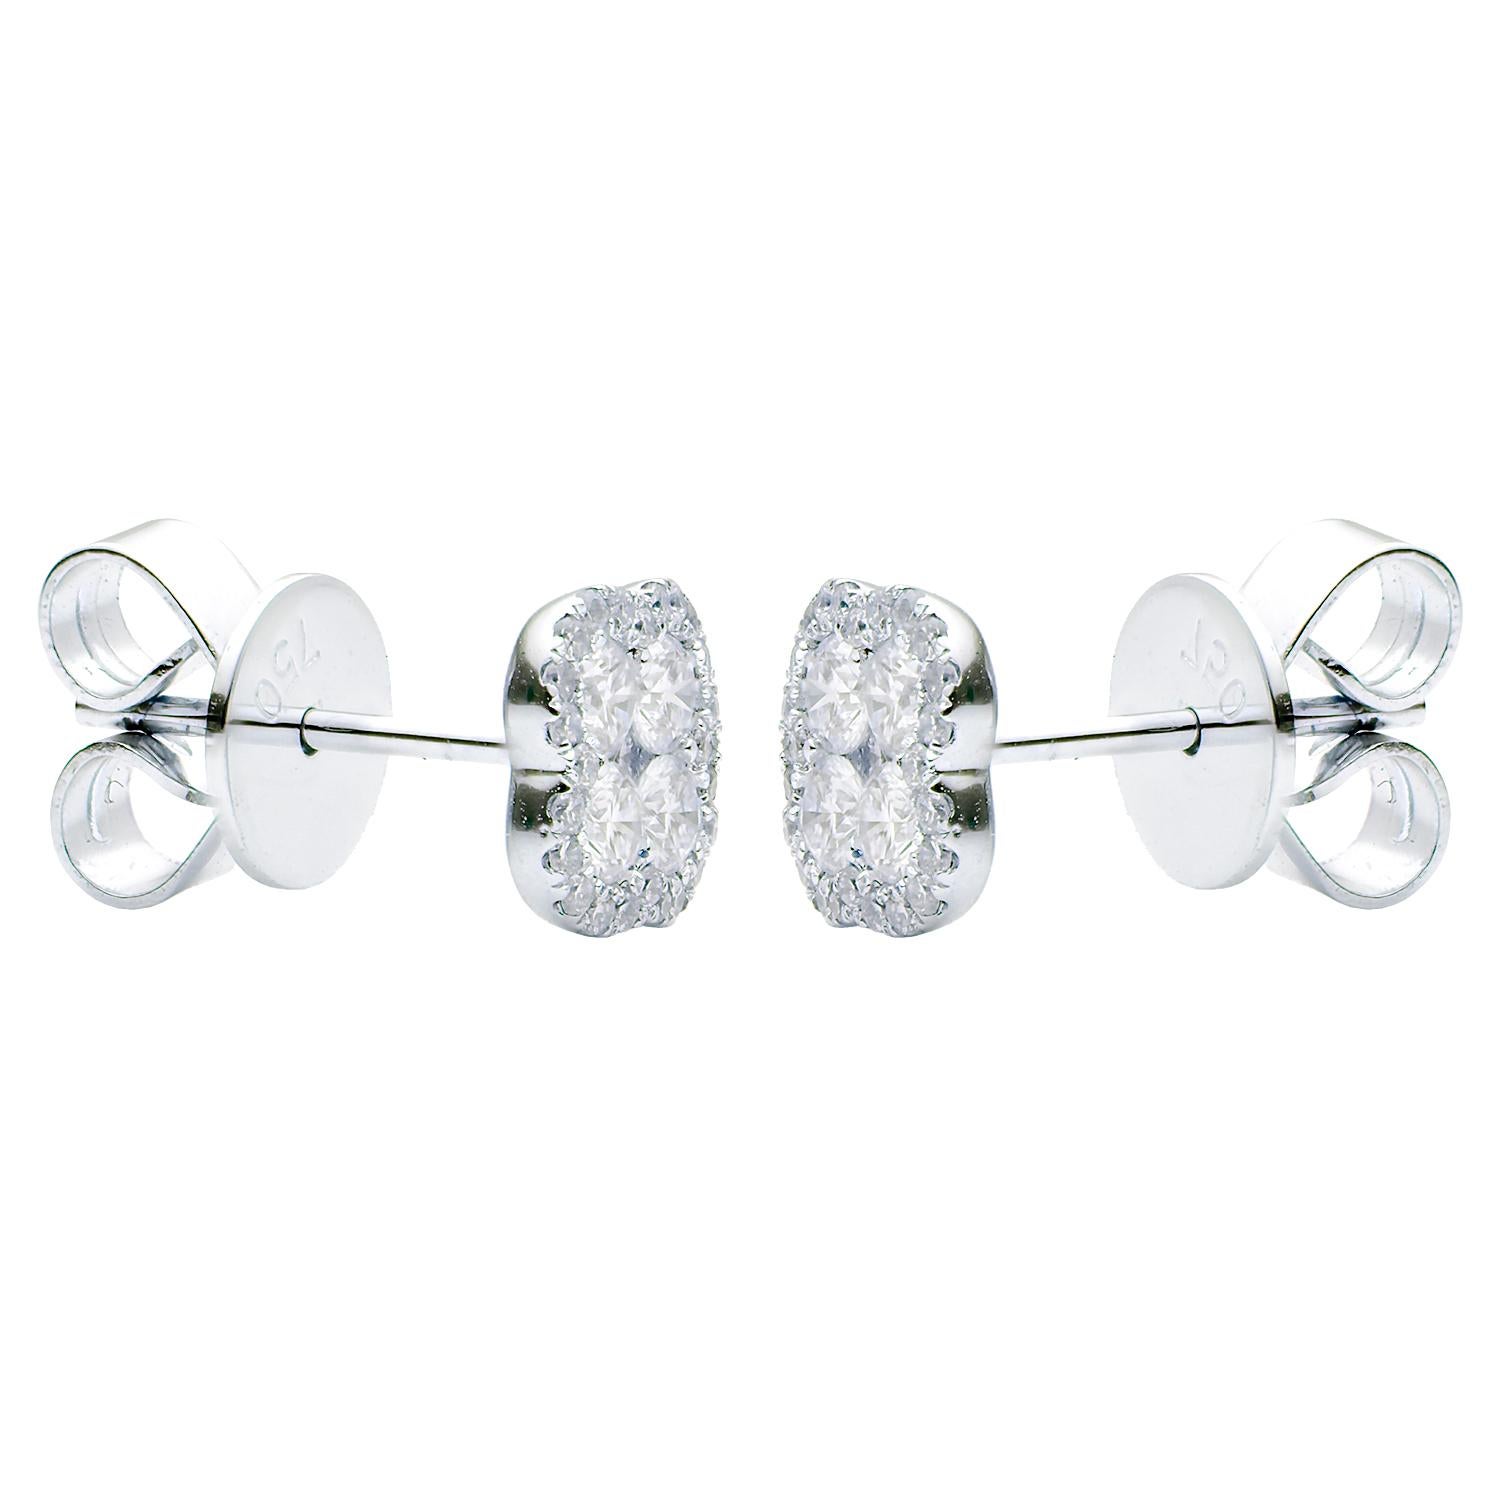 Contemporary 18 Karat White Gold Diamond Cluster Stud Earrings with Halo